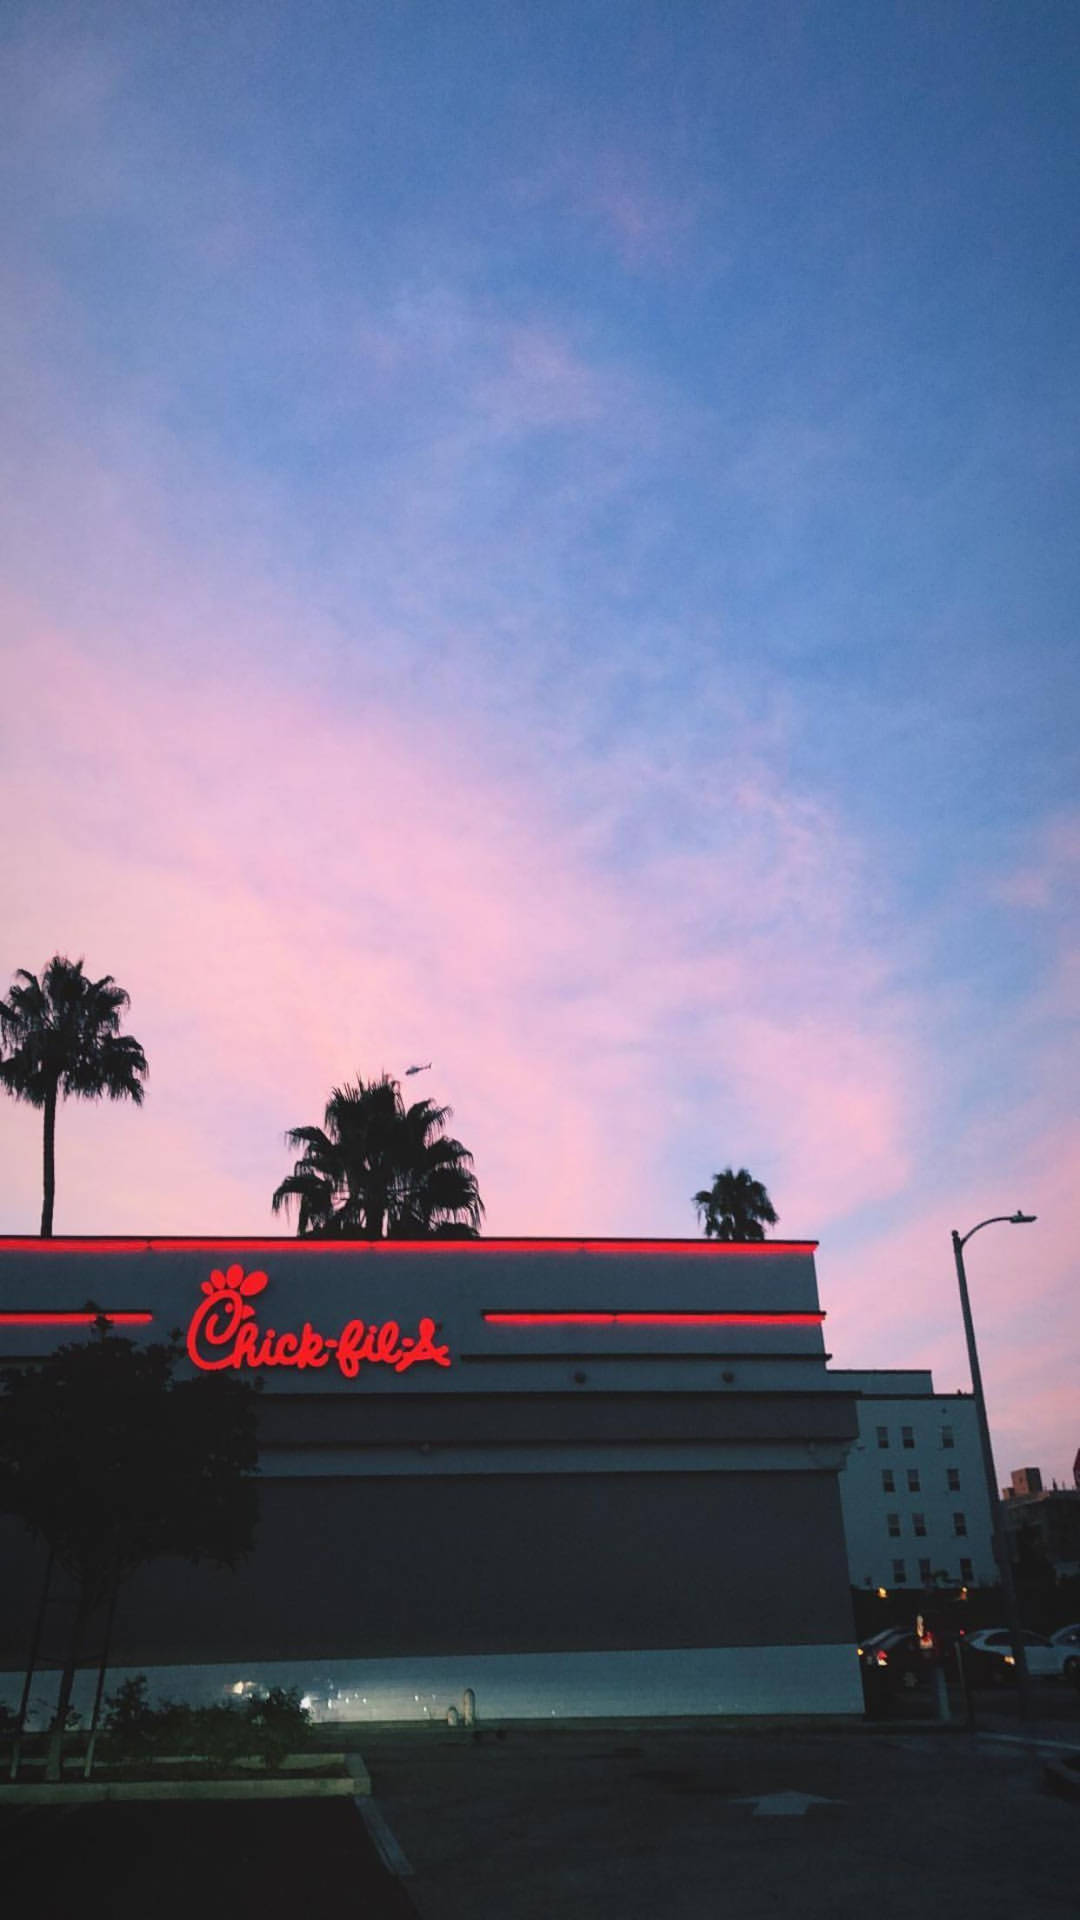 Aesthetic Chick Fil A Signage Wallpaper